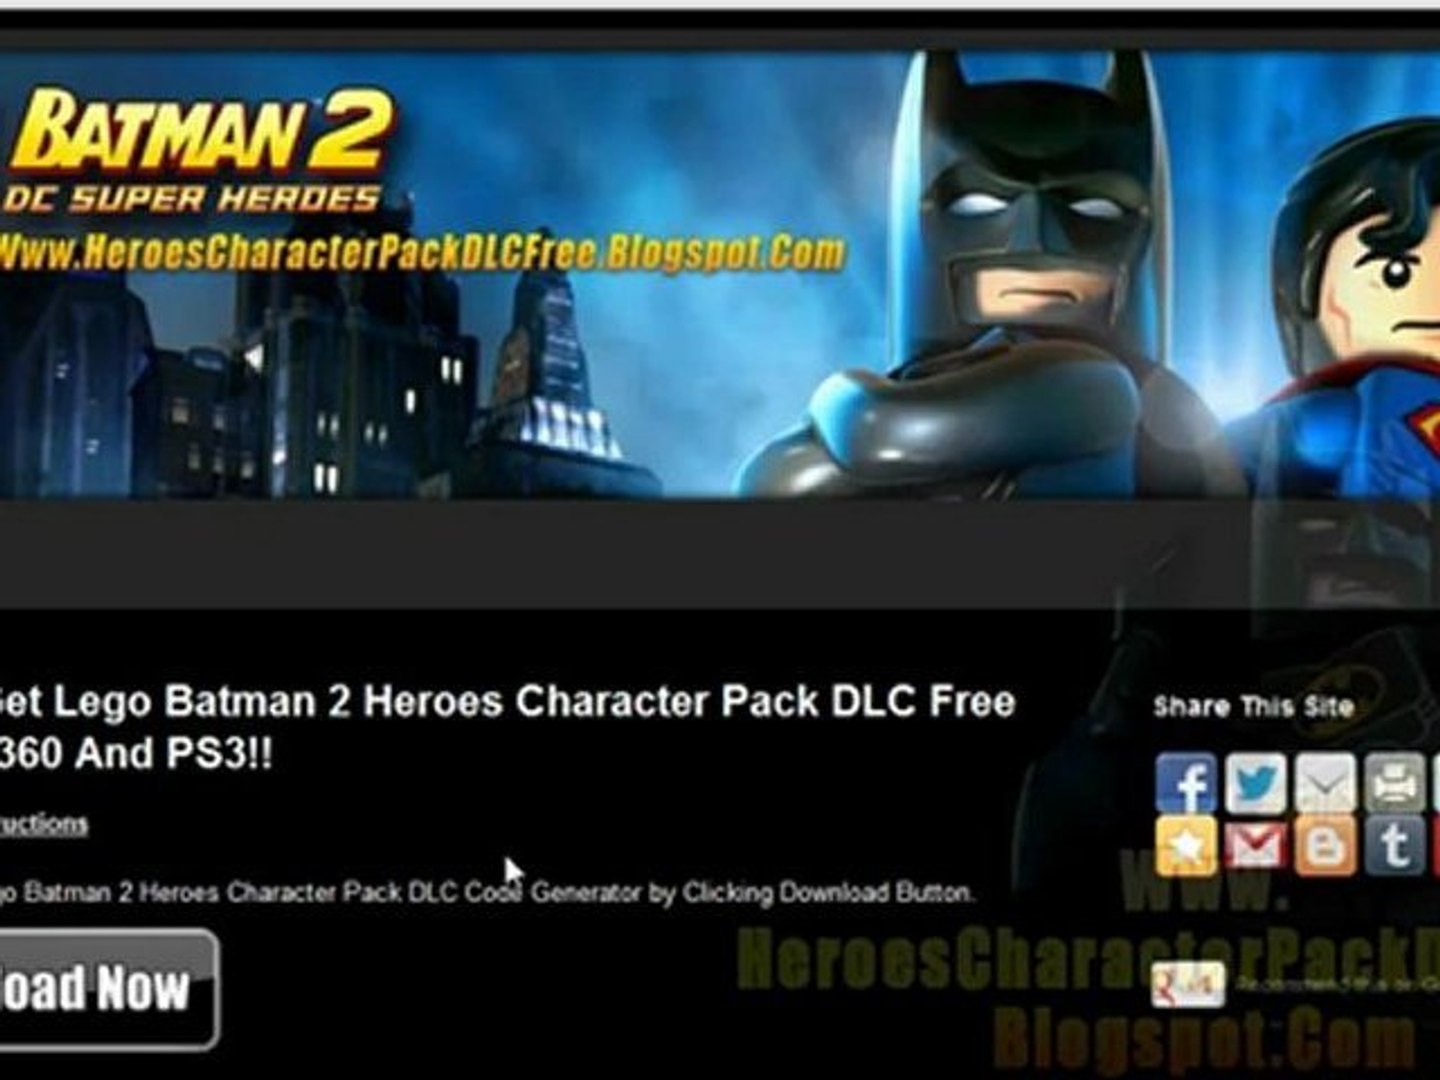 Lego Batman 2 Heroes Character Pack DLC Codes - Free!! - video Dailymotion